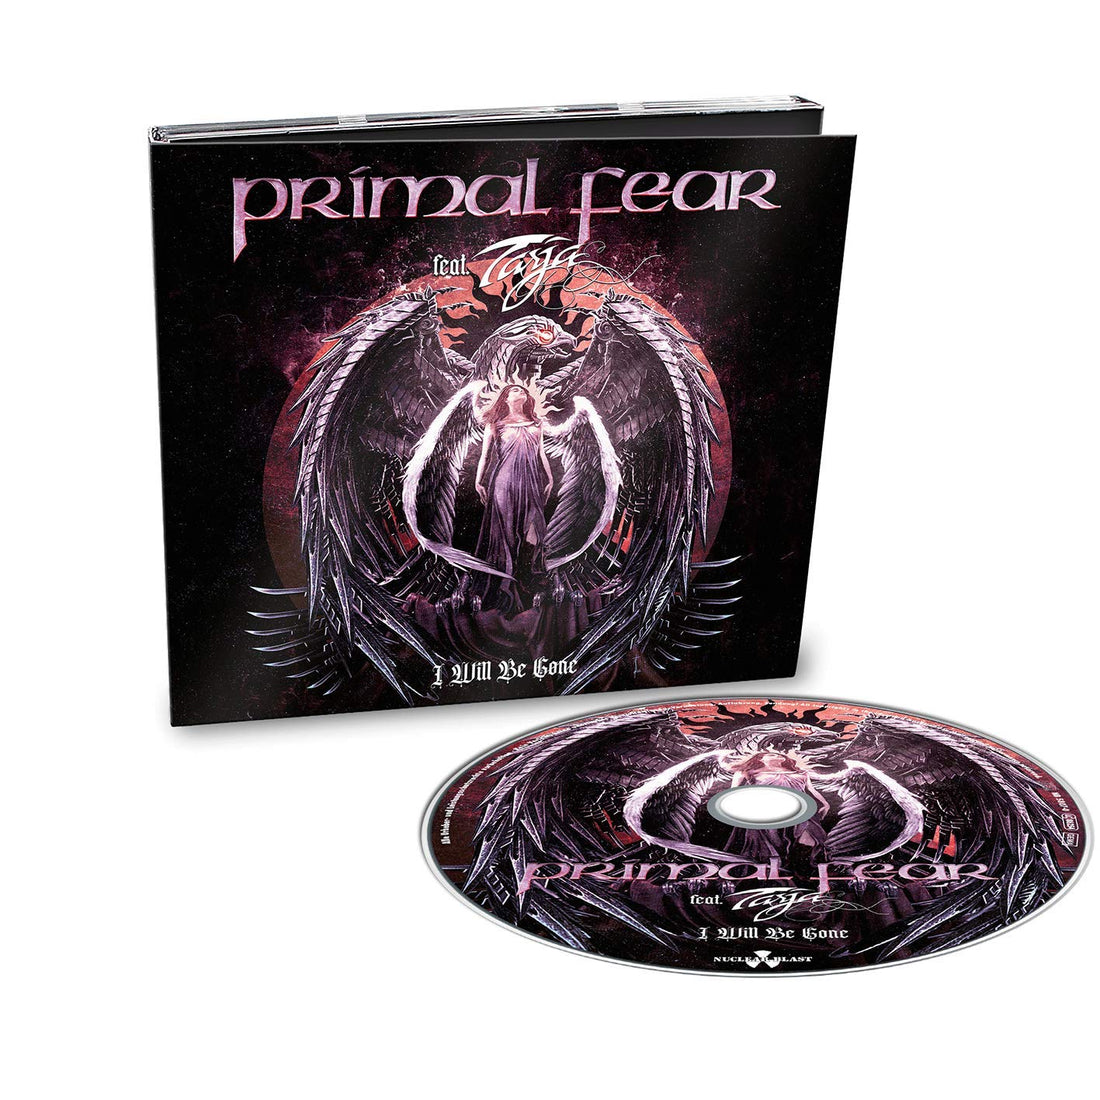 Primal Fear - 'I Will Be Gone' CD (7084255051969)